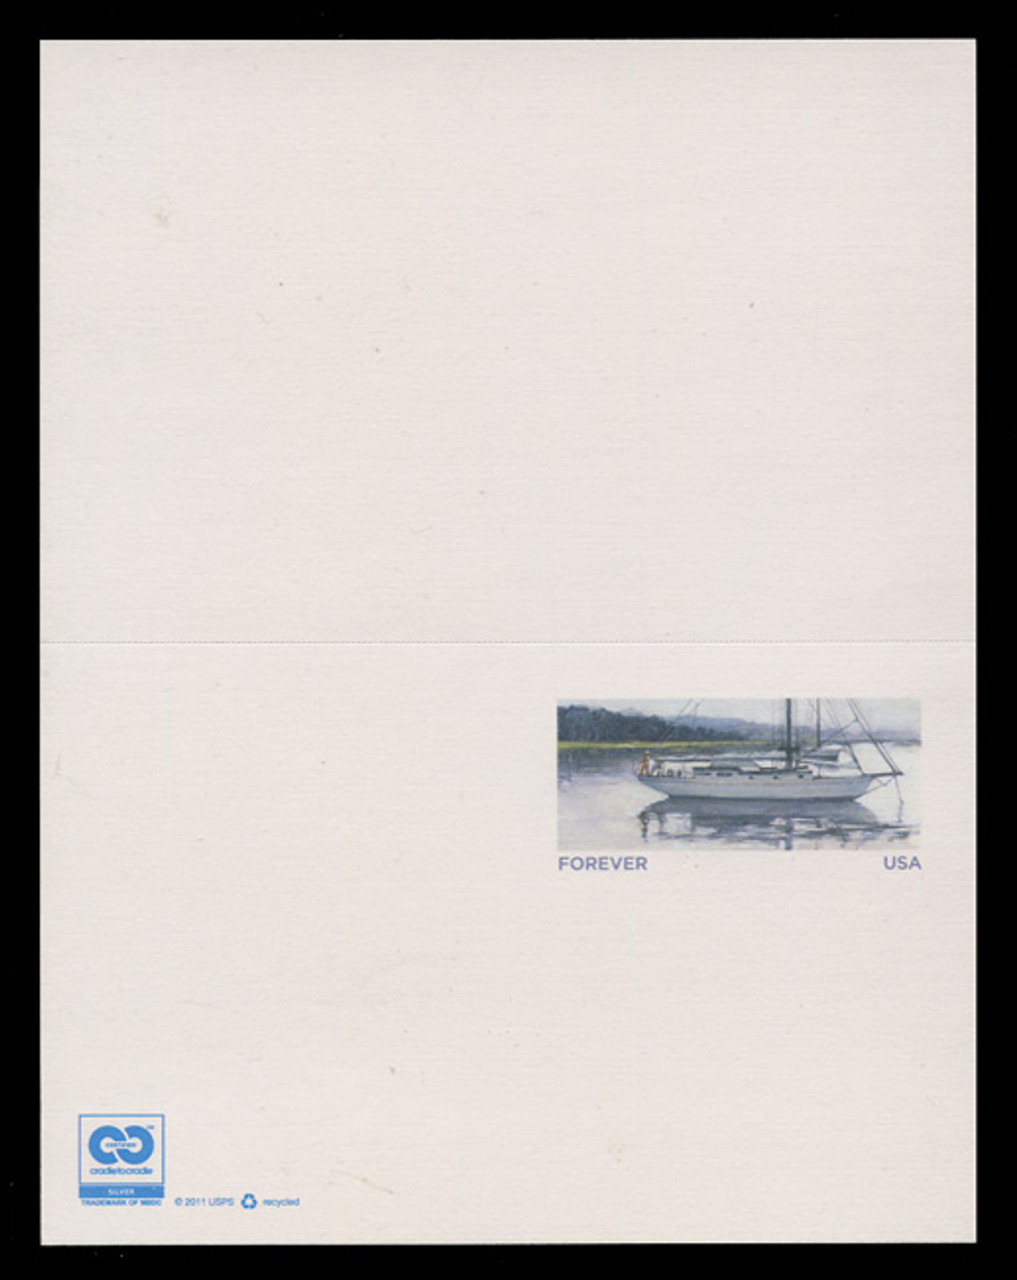 USA Scott # UY 50, 2012 (32c) Sailboat - Mint Message-Reply Card - UNFOLDED